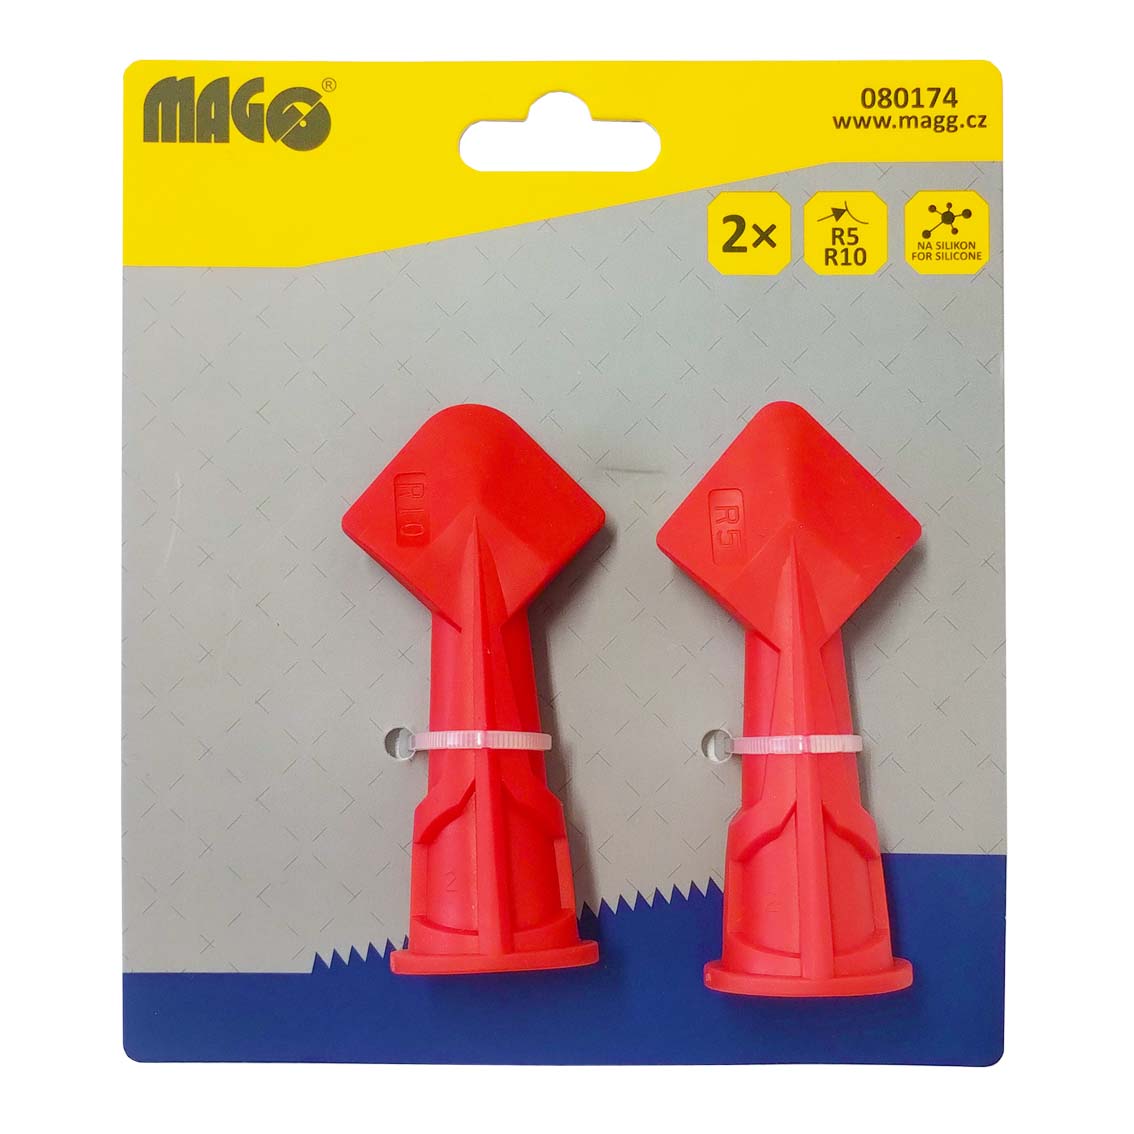 Silicone squeegee set - 2 pcs